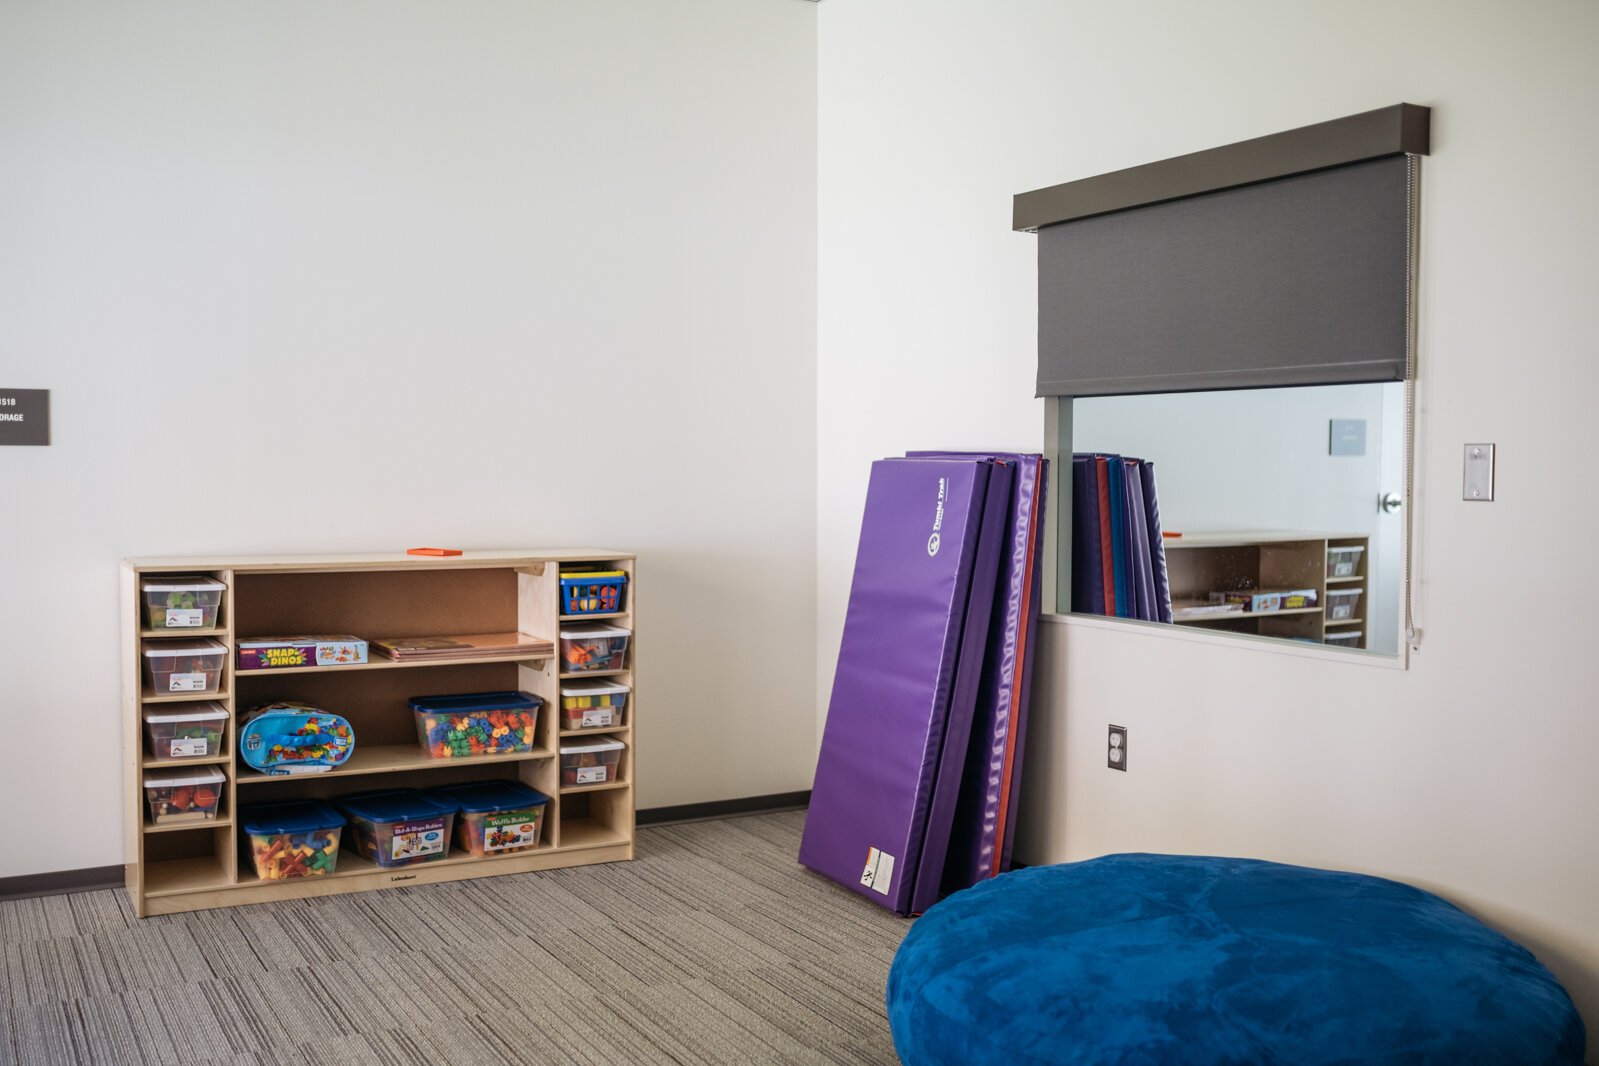 Therapeutic spaces give children a space to decompress and express themselves. Through an observation window, parents and behavioral health professionals can learn more and work together to ensure they get the support and care they need.  